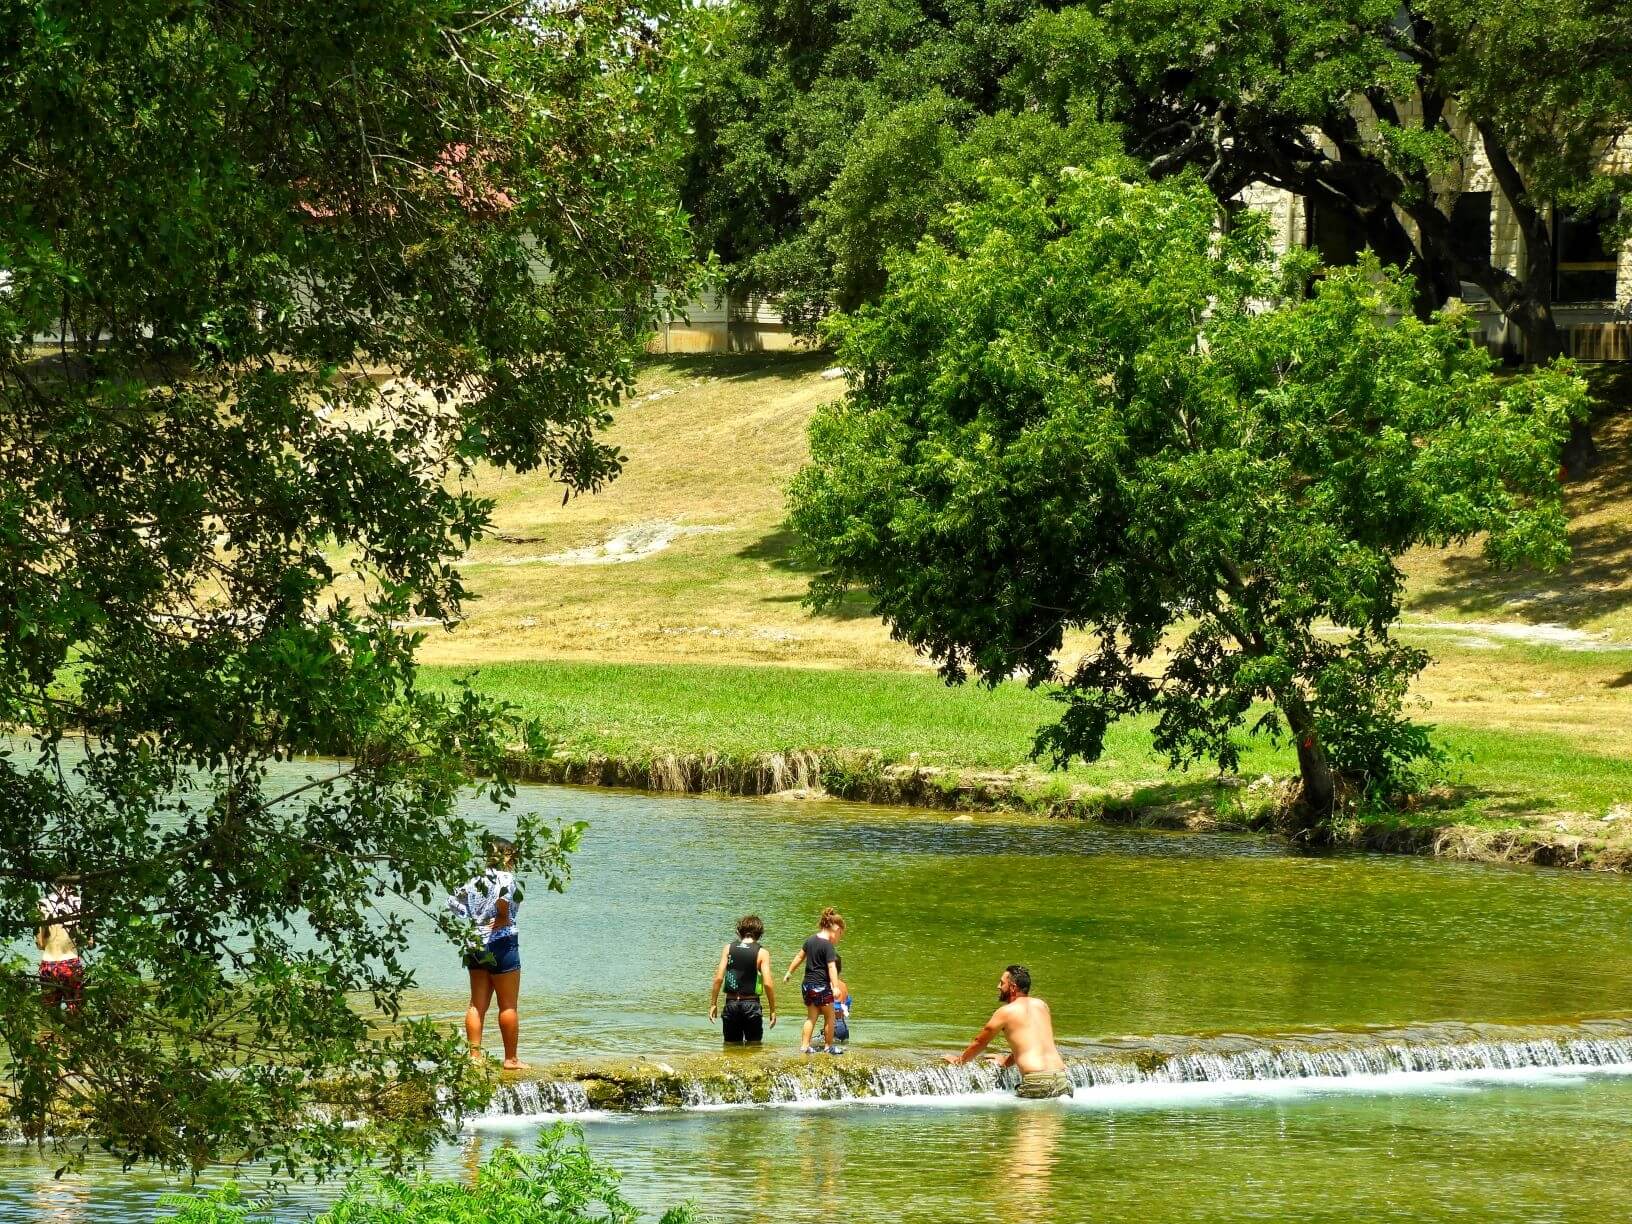 Salado Creek west view with a family and small children wading in the water.